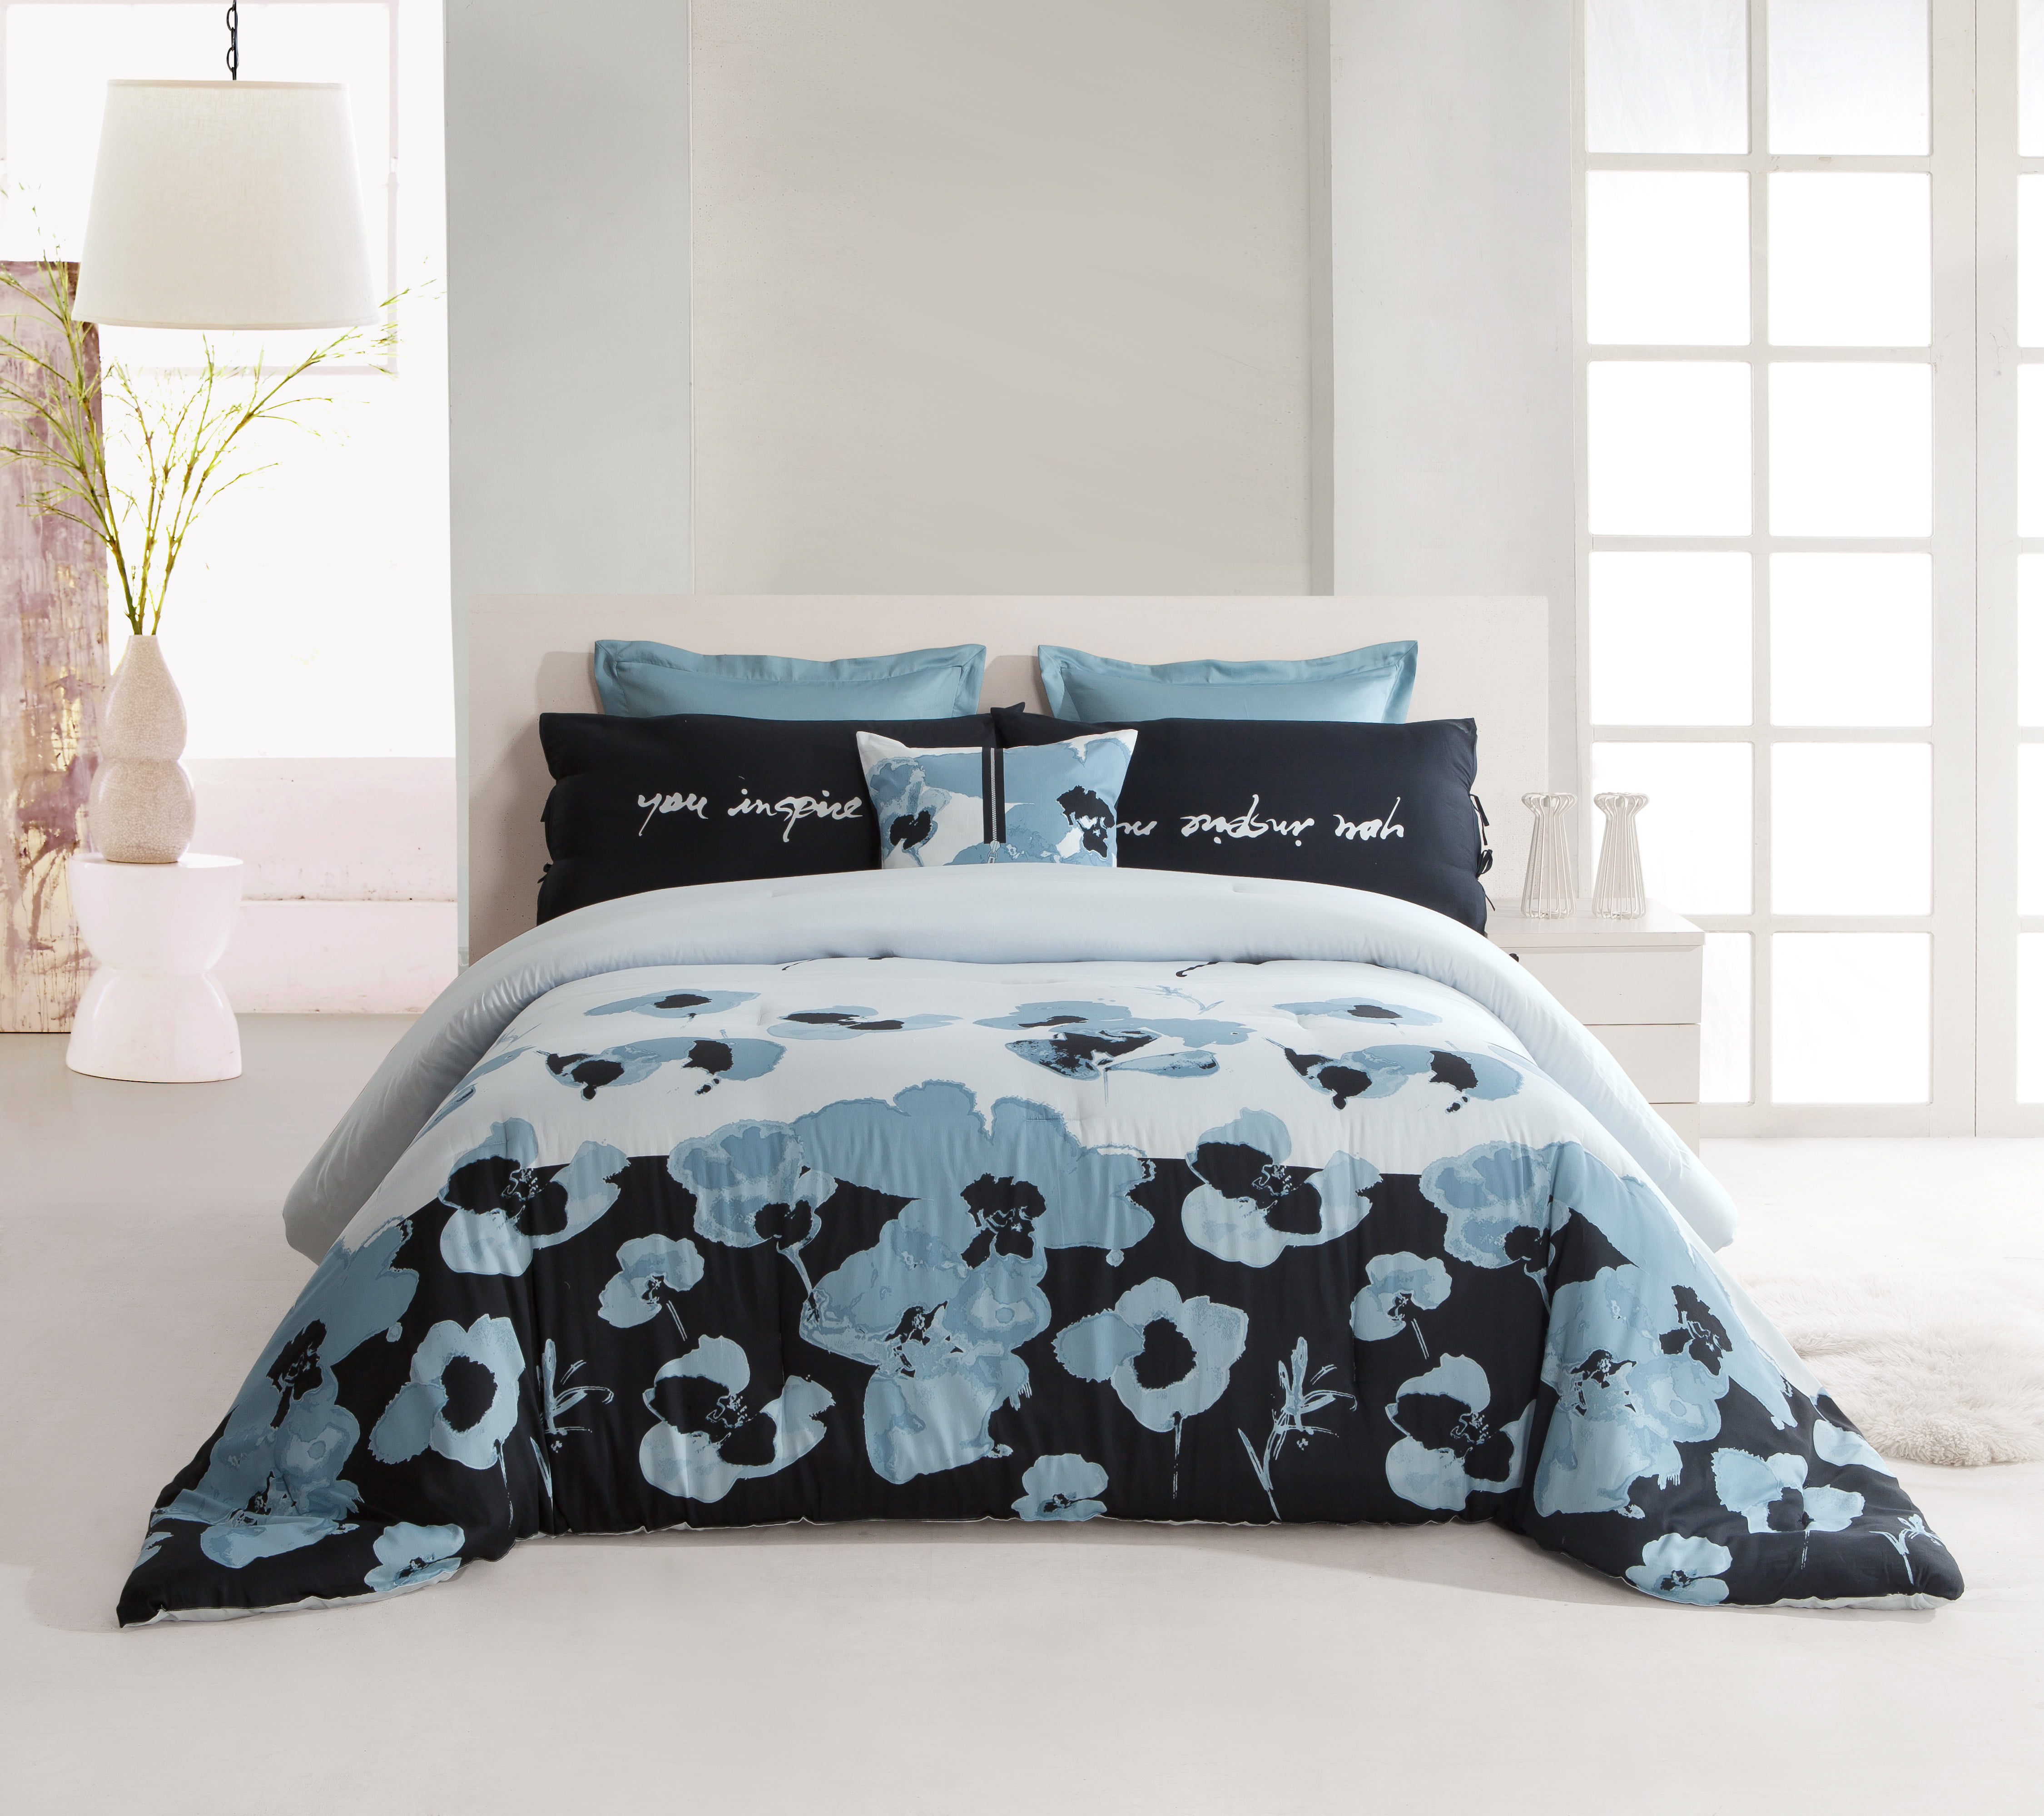 Multi-Style Aiking Home 3PC 100% Cotton Printed Duvet Cover Set Queen Size 